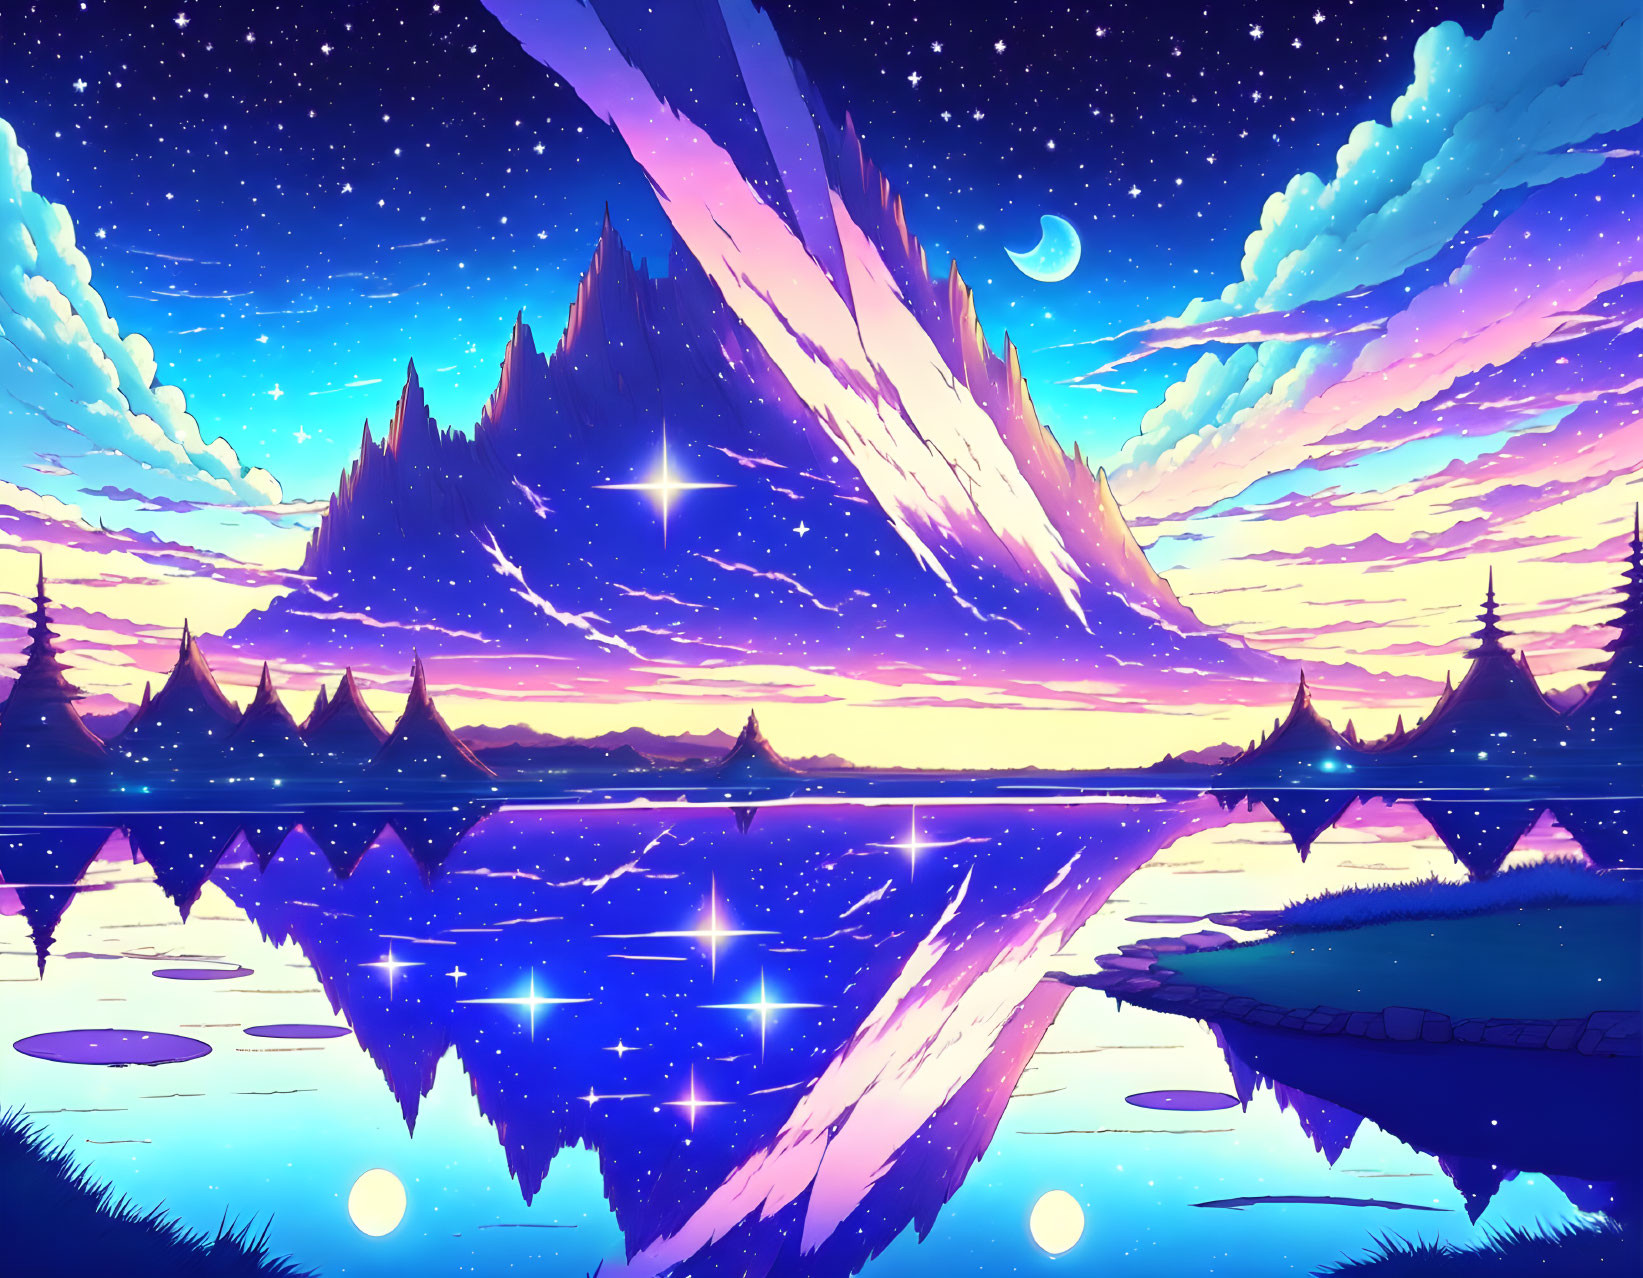 Mirror mountain on a lake with stars